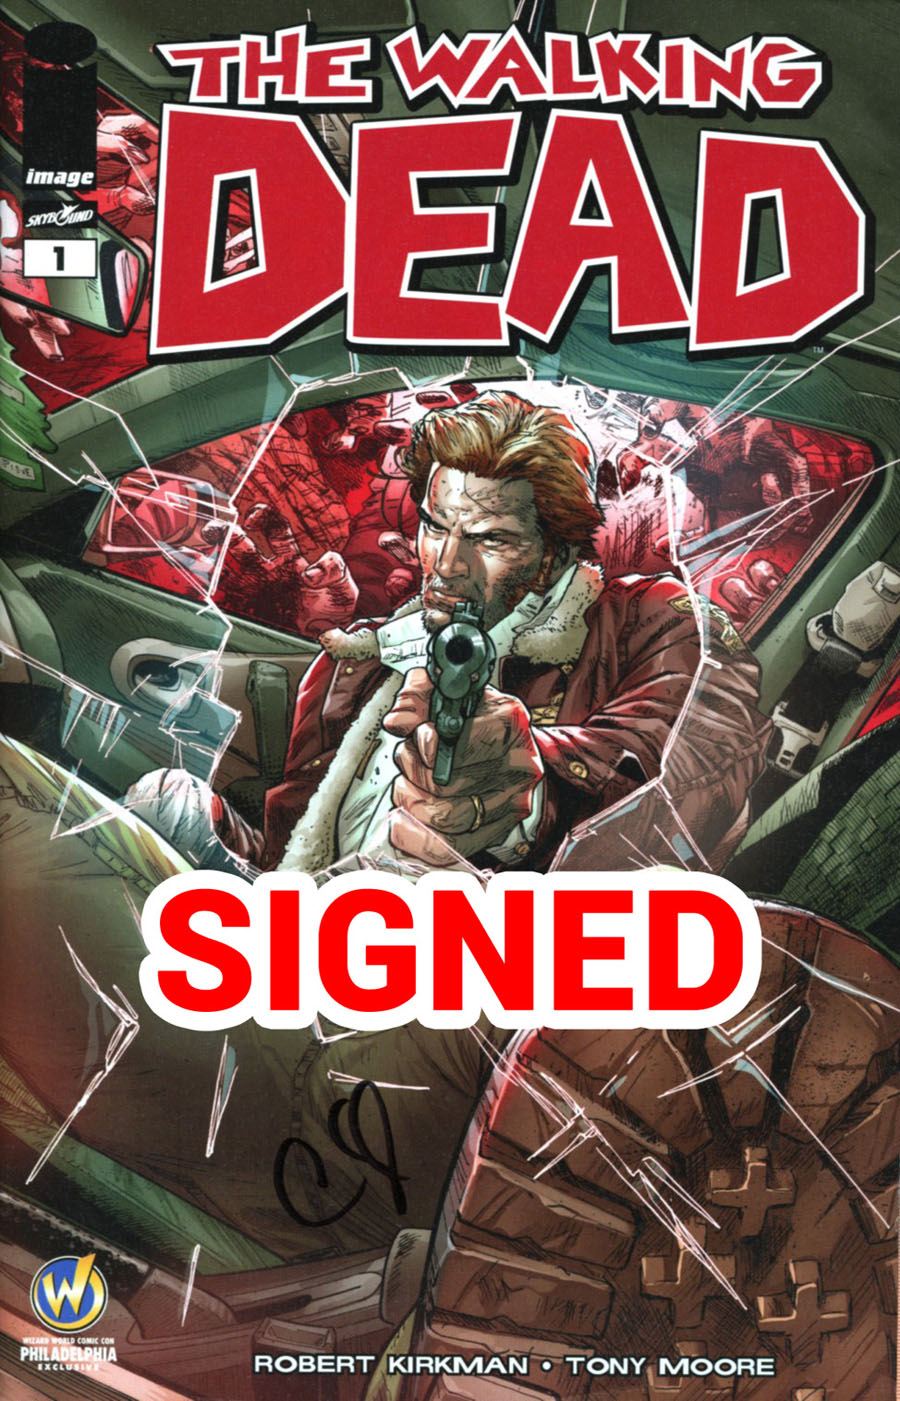 Walking Dead #1 Cover Z-L Wizard World Comic Con Philadelphia Exclusive Clay Mann Color Variant Cover Signed By Clay Mann